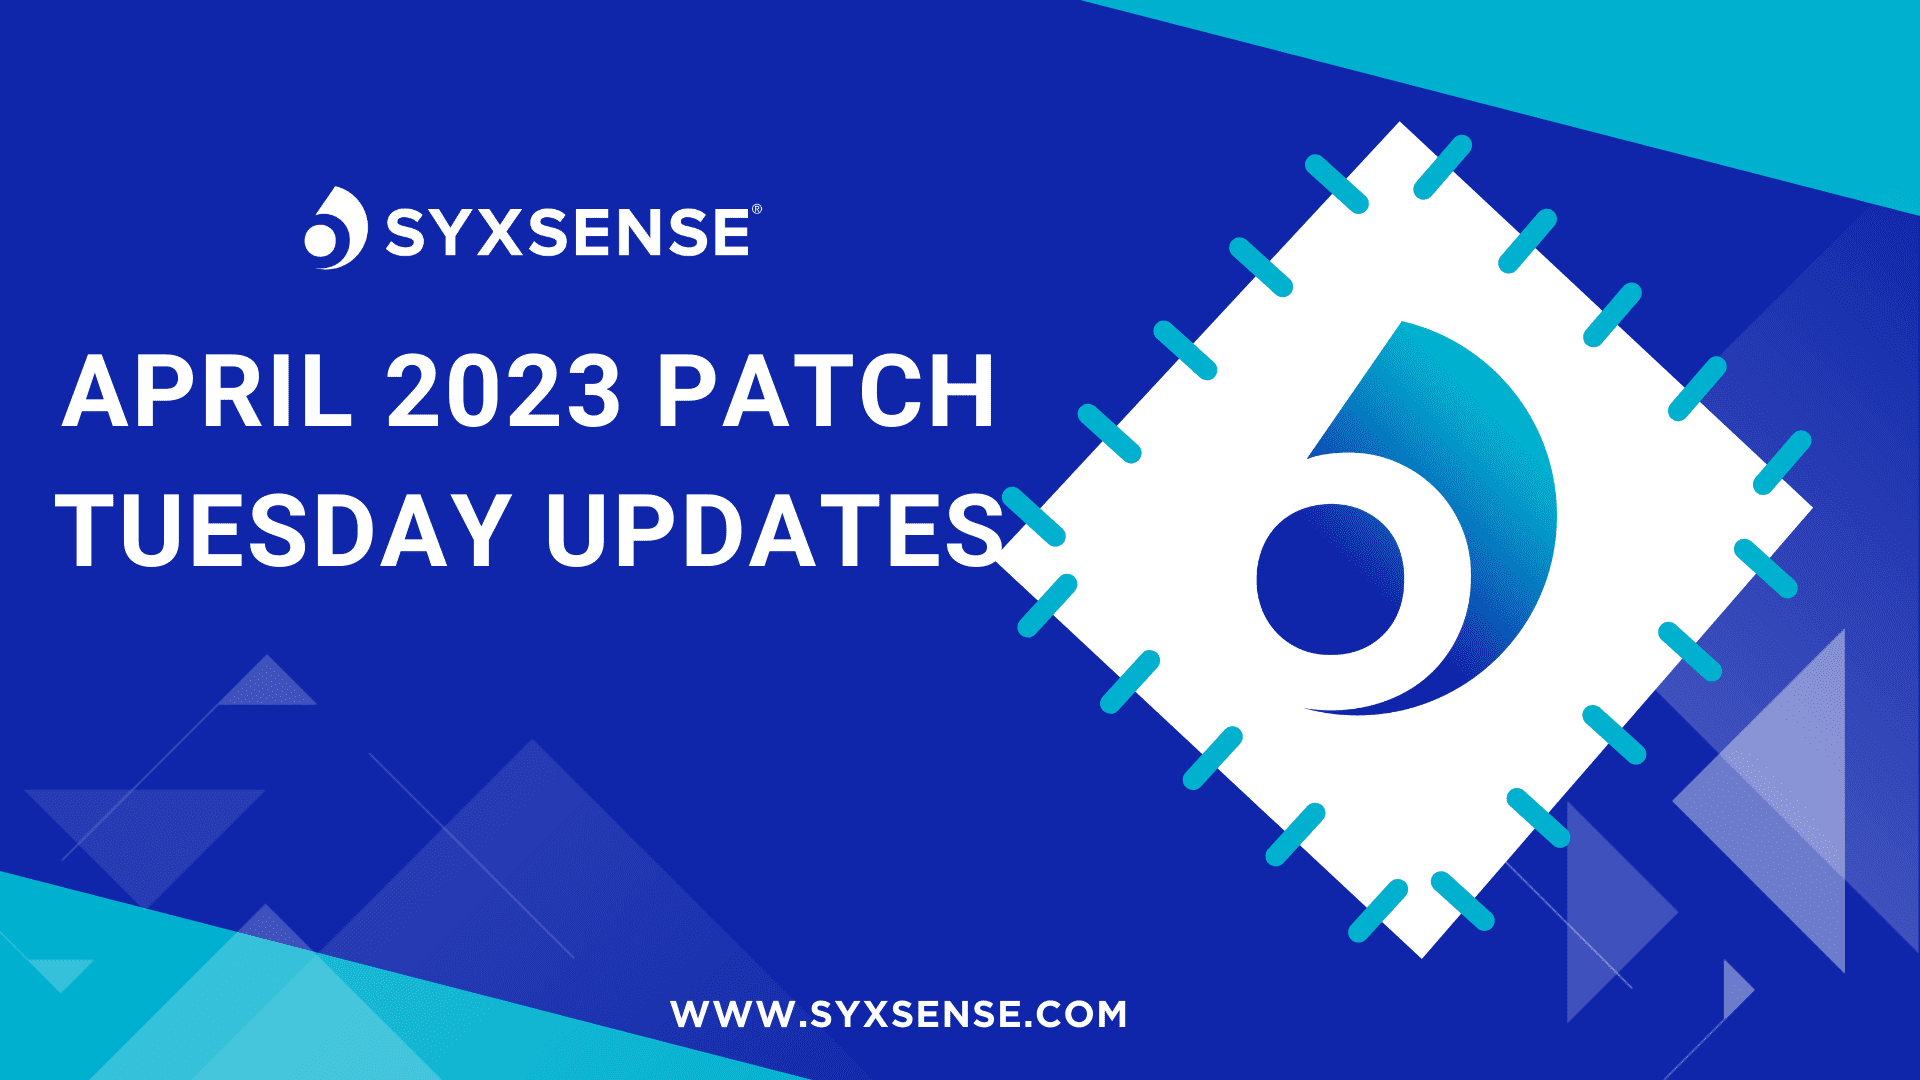 April 2023 Patch Tuesday Update with Syxsense